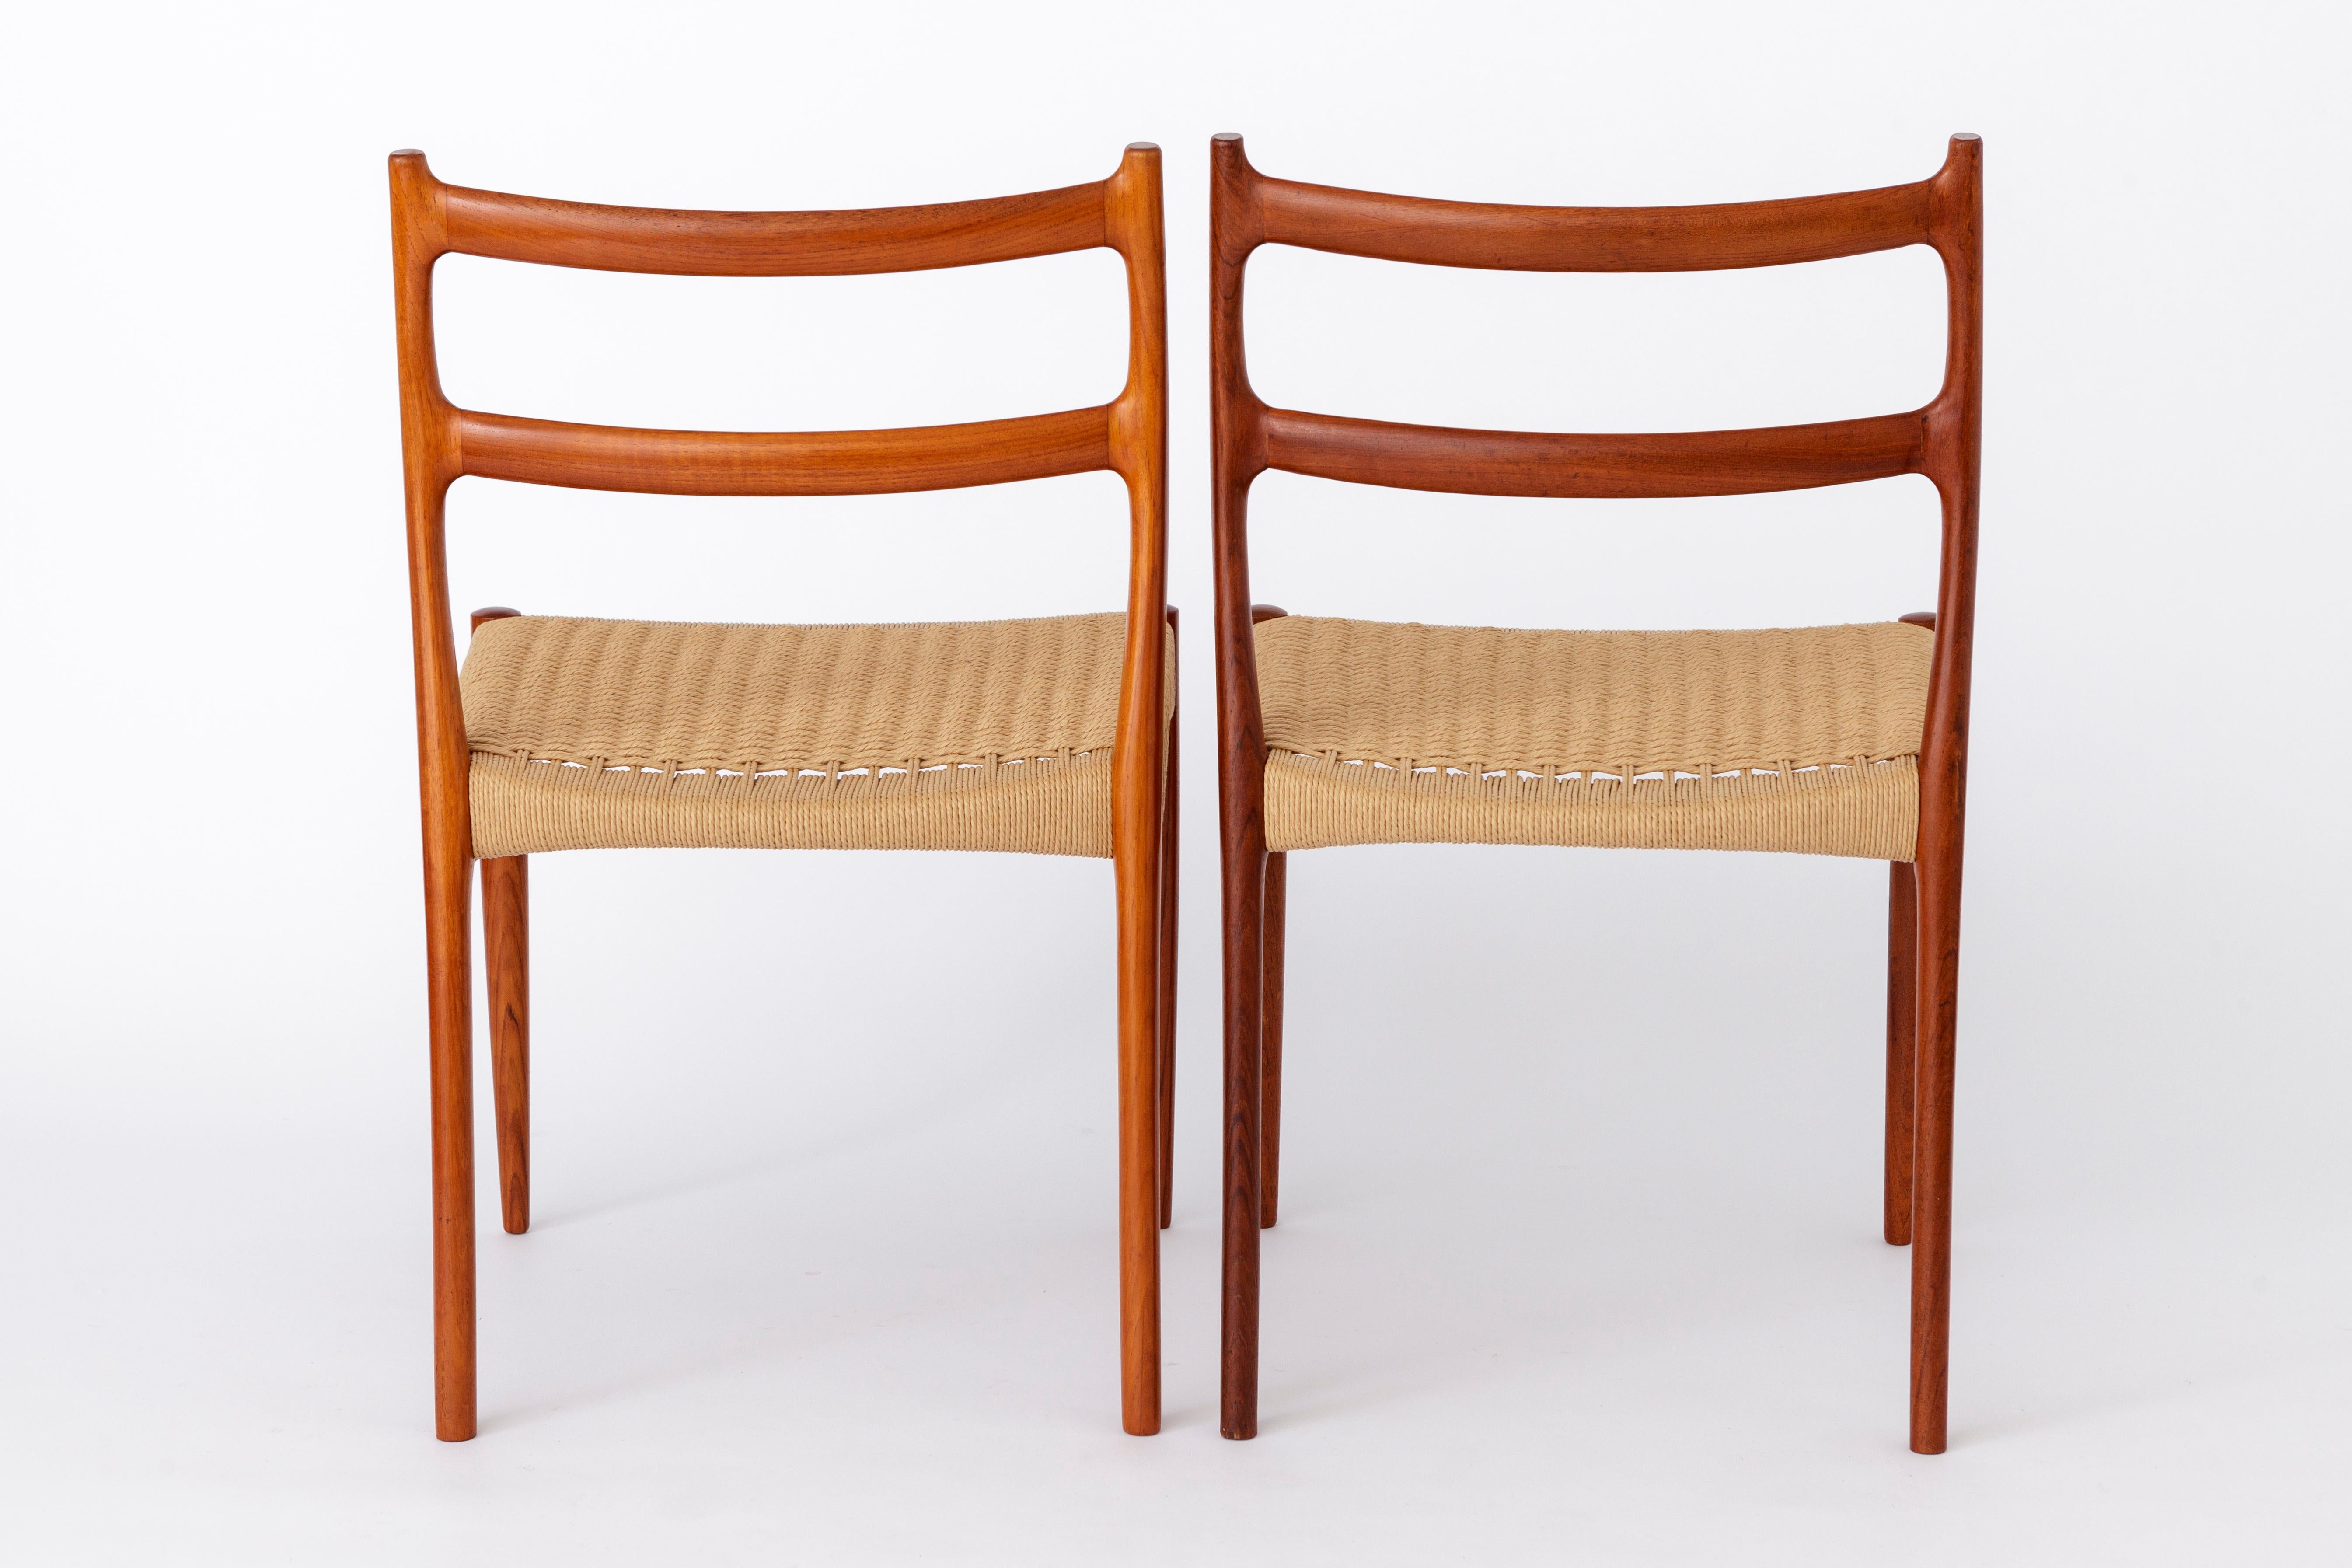 Polished 2 Søren Ladefoged chairs, teak, 1960s, papercord seat, dining chairs, set of 2 For Sale